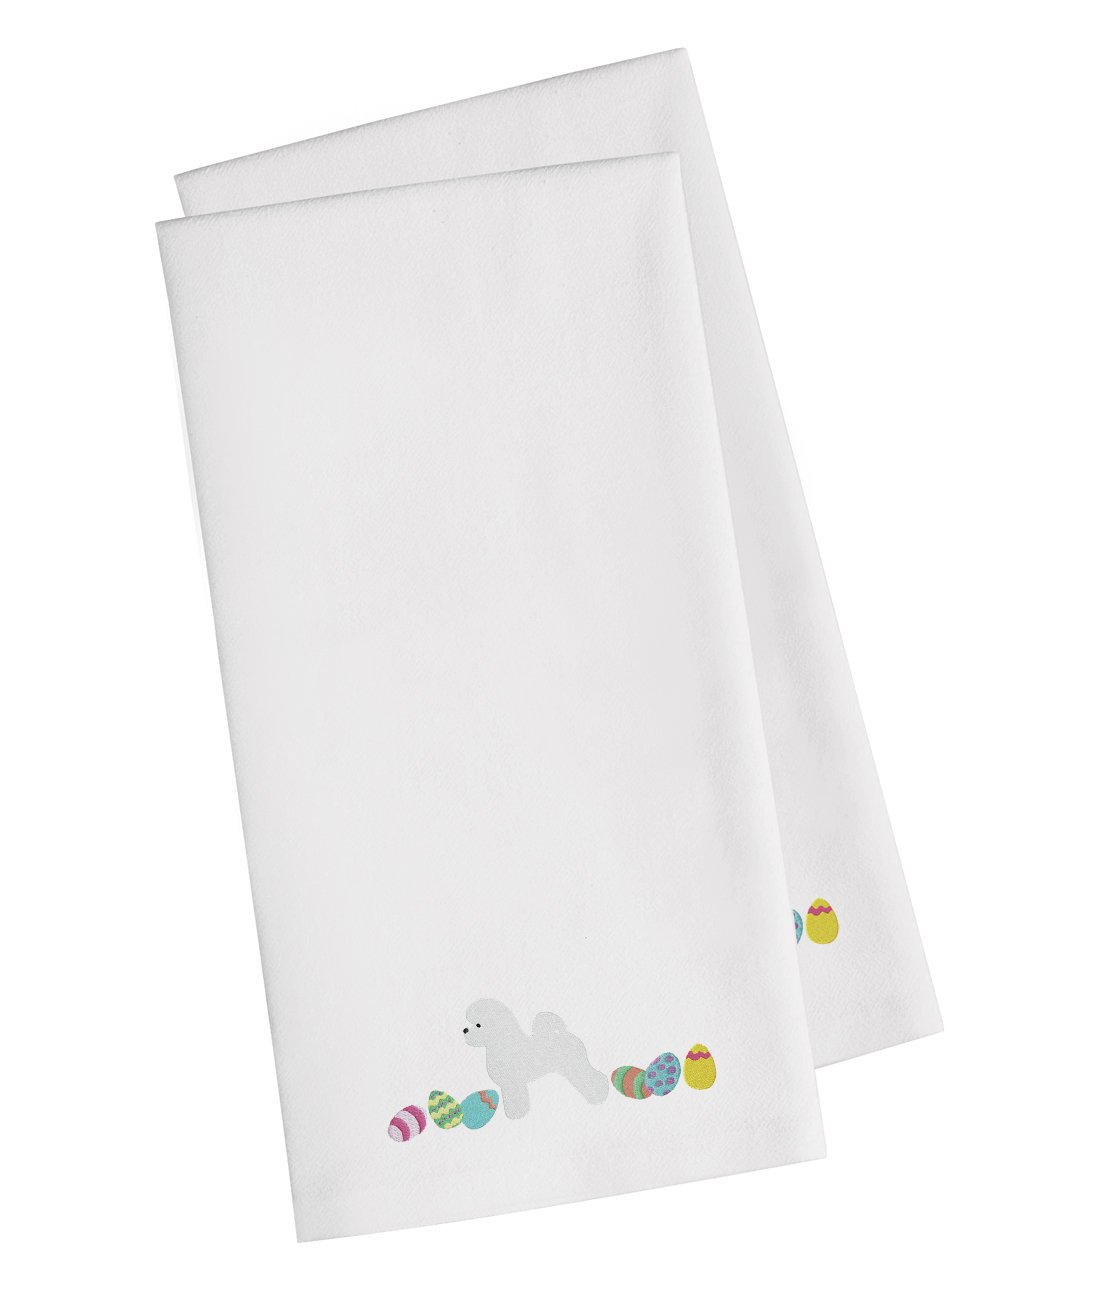 Bichon Frise Easter White Embroidered Kitchen Towel Set of 2 CK1609WHTWE by Caroline's Treasures